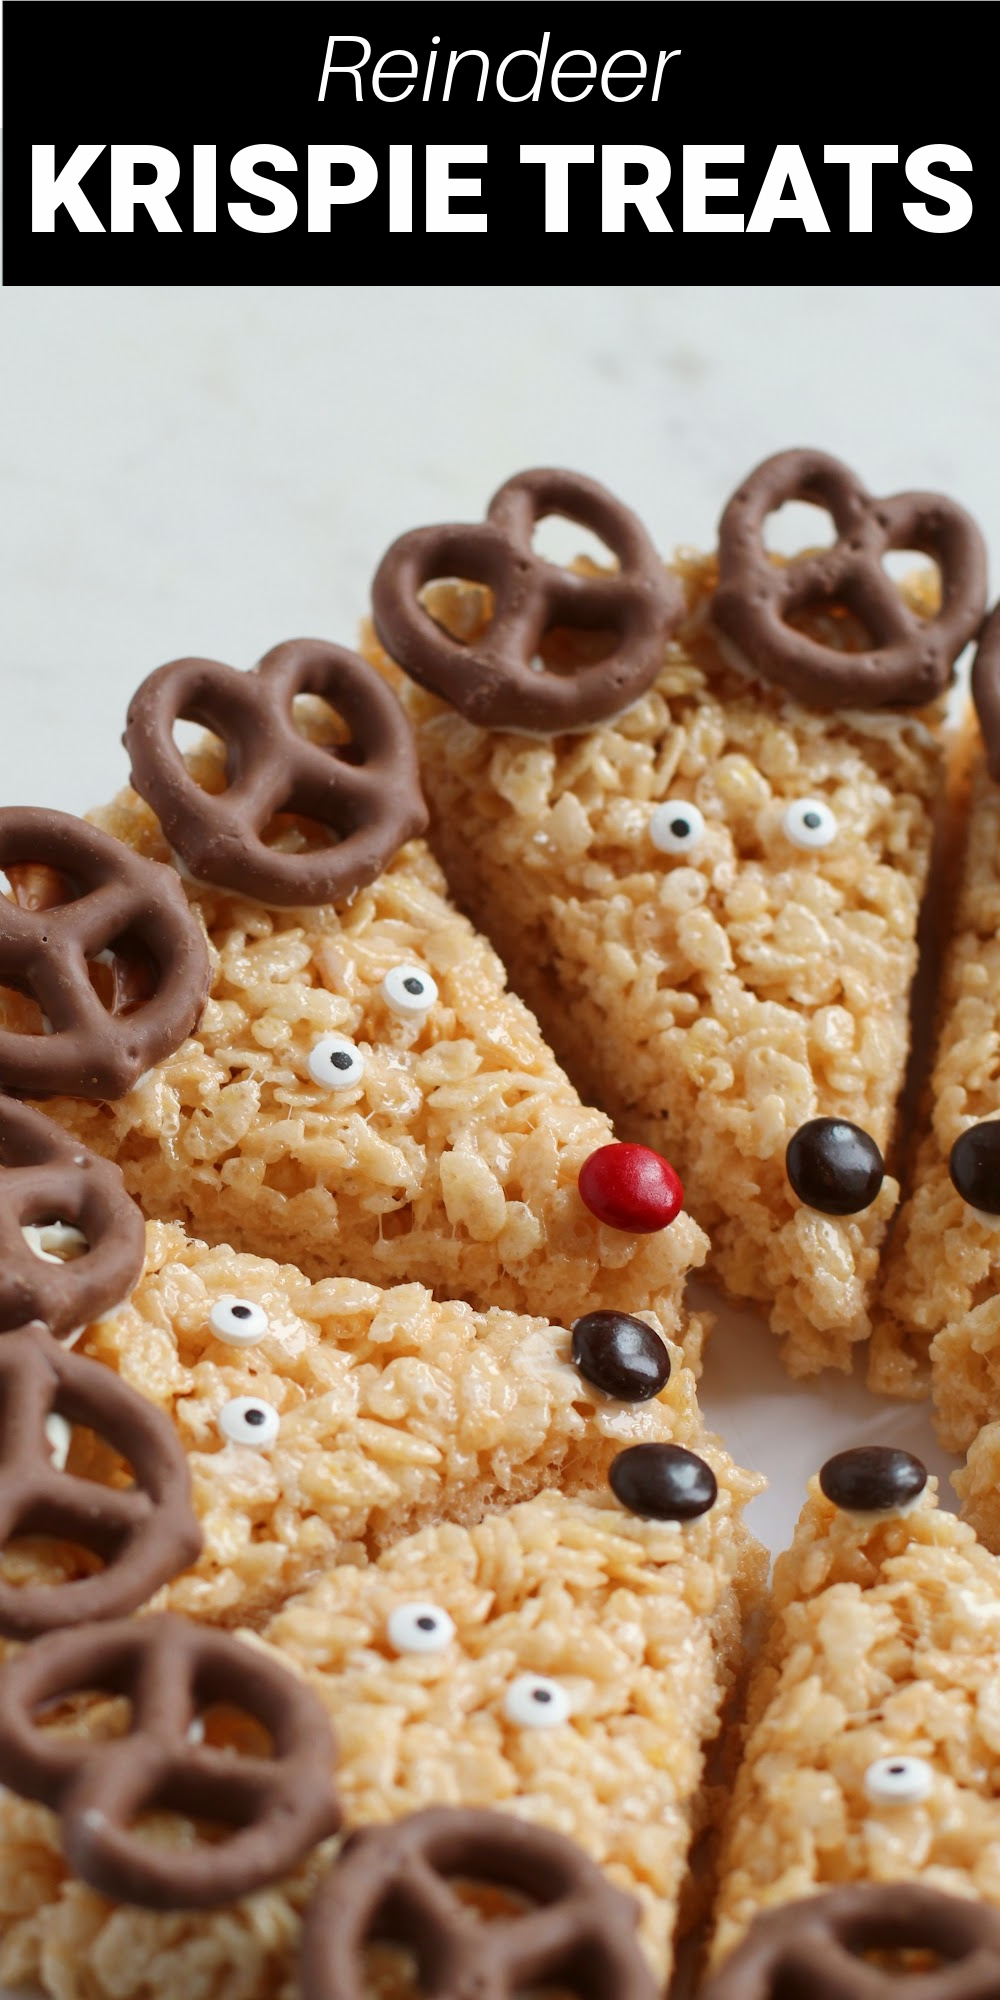 Turn your favorite treats into reindeer Rice Krispie treats with a few simple steps. Even make one reindeer Rudolph with a red nose!